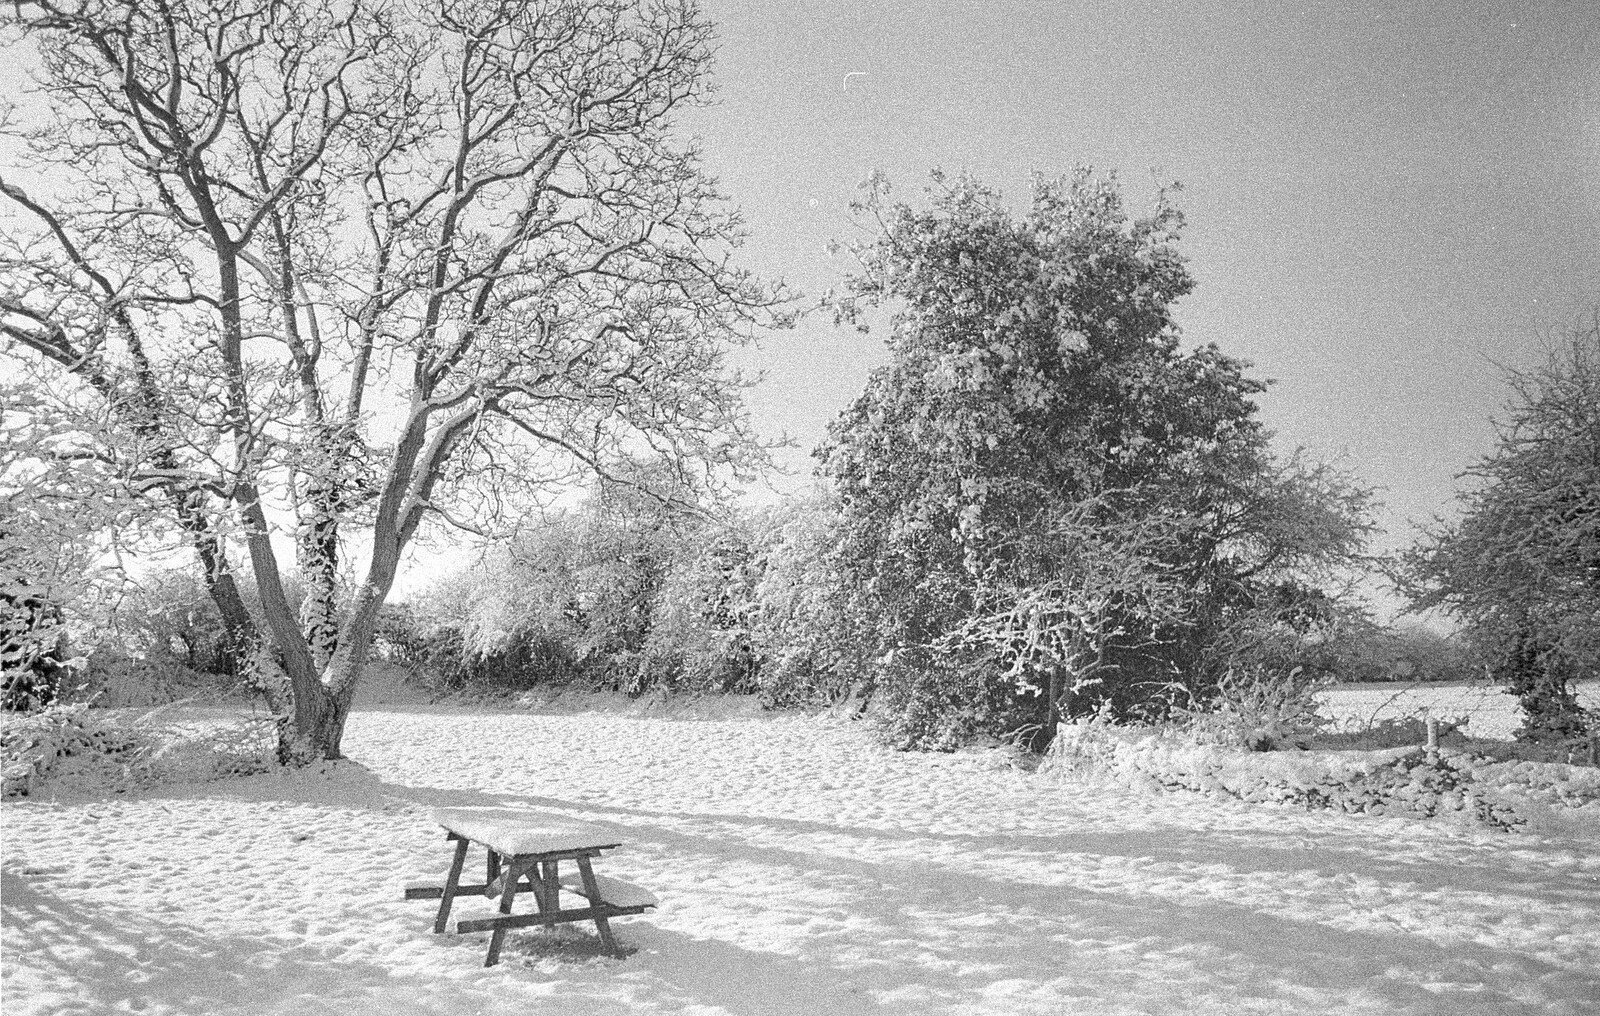 The back garden in snow from 3G Lab, and Building a Staircase, Brome, Suffolk - 11th February 2001